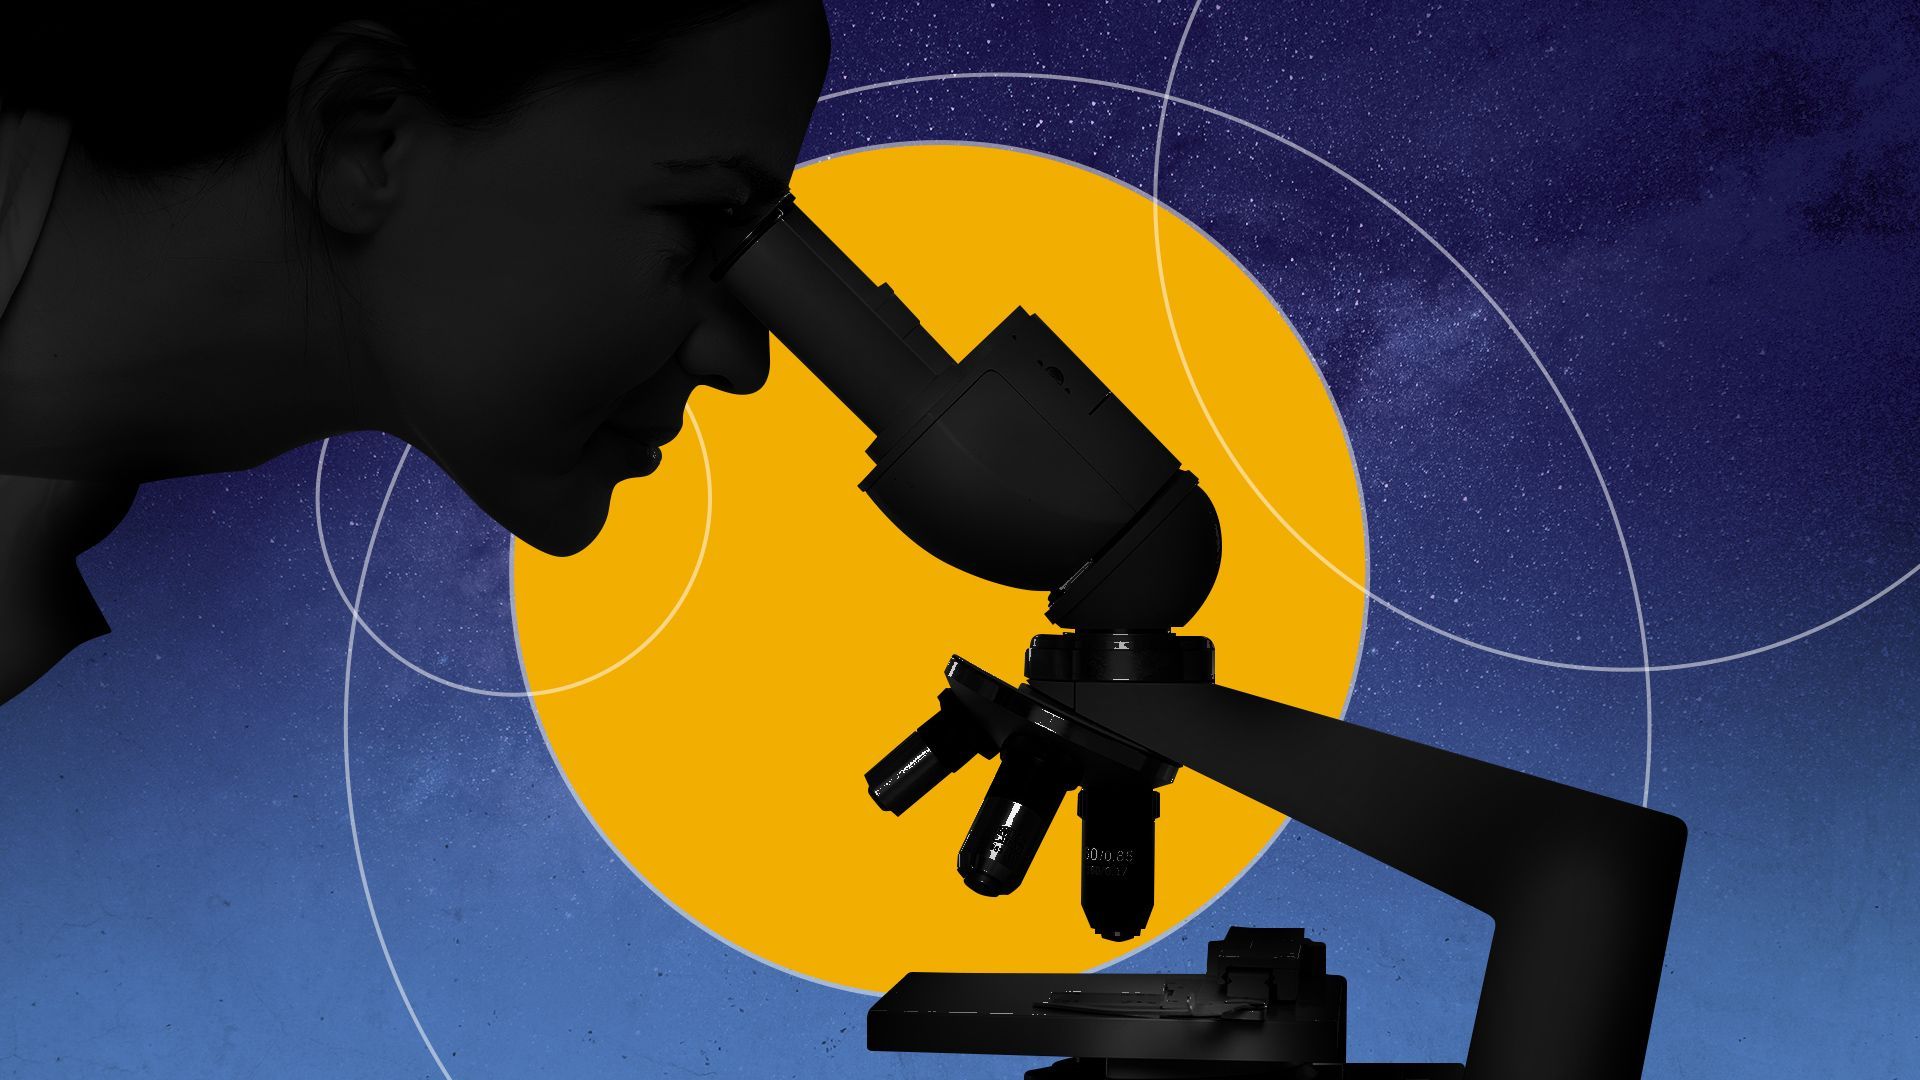 Illustrated collage of a researcher looking through a microscope on a starry background surrounded by circles and orbits. 